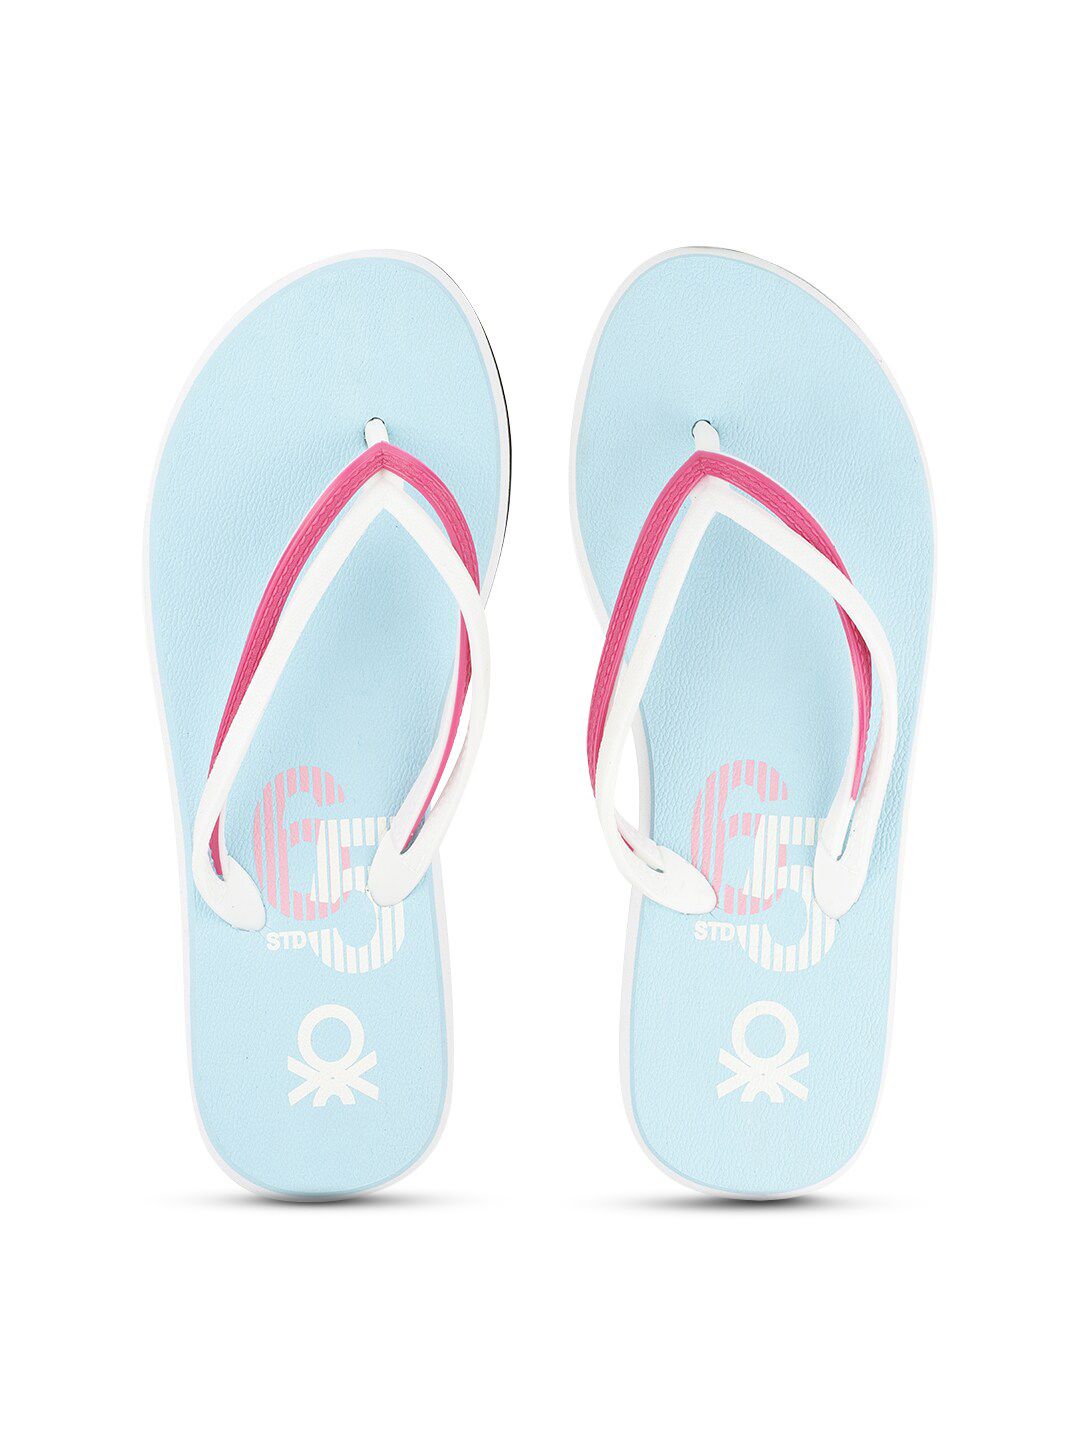 United Colors of Benetton Women Blue & Multicoloured Printed Rubber Thong Flip-Flops Price in India